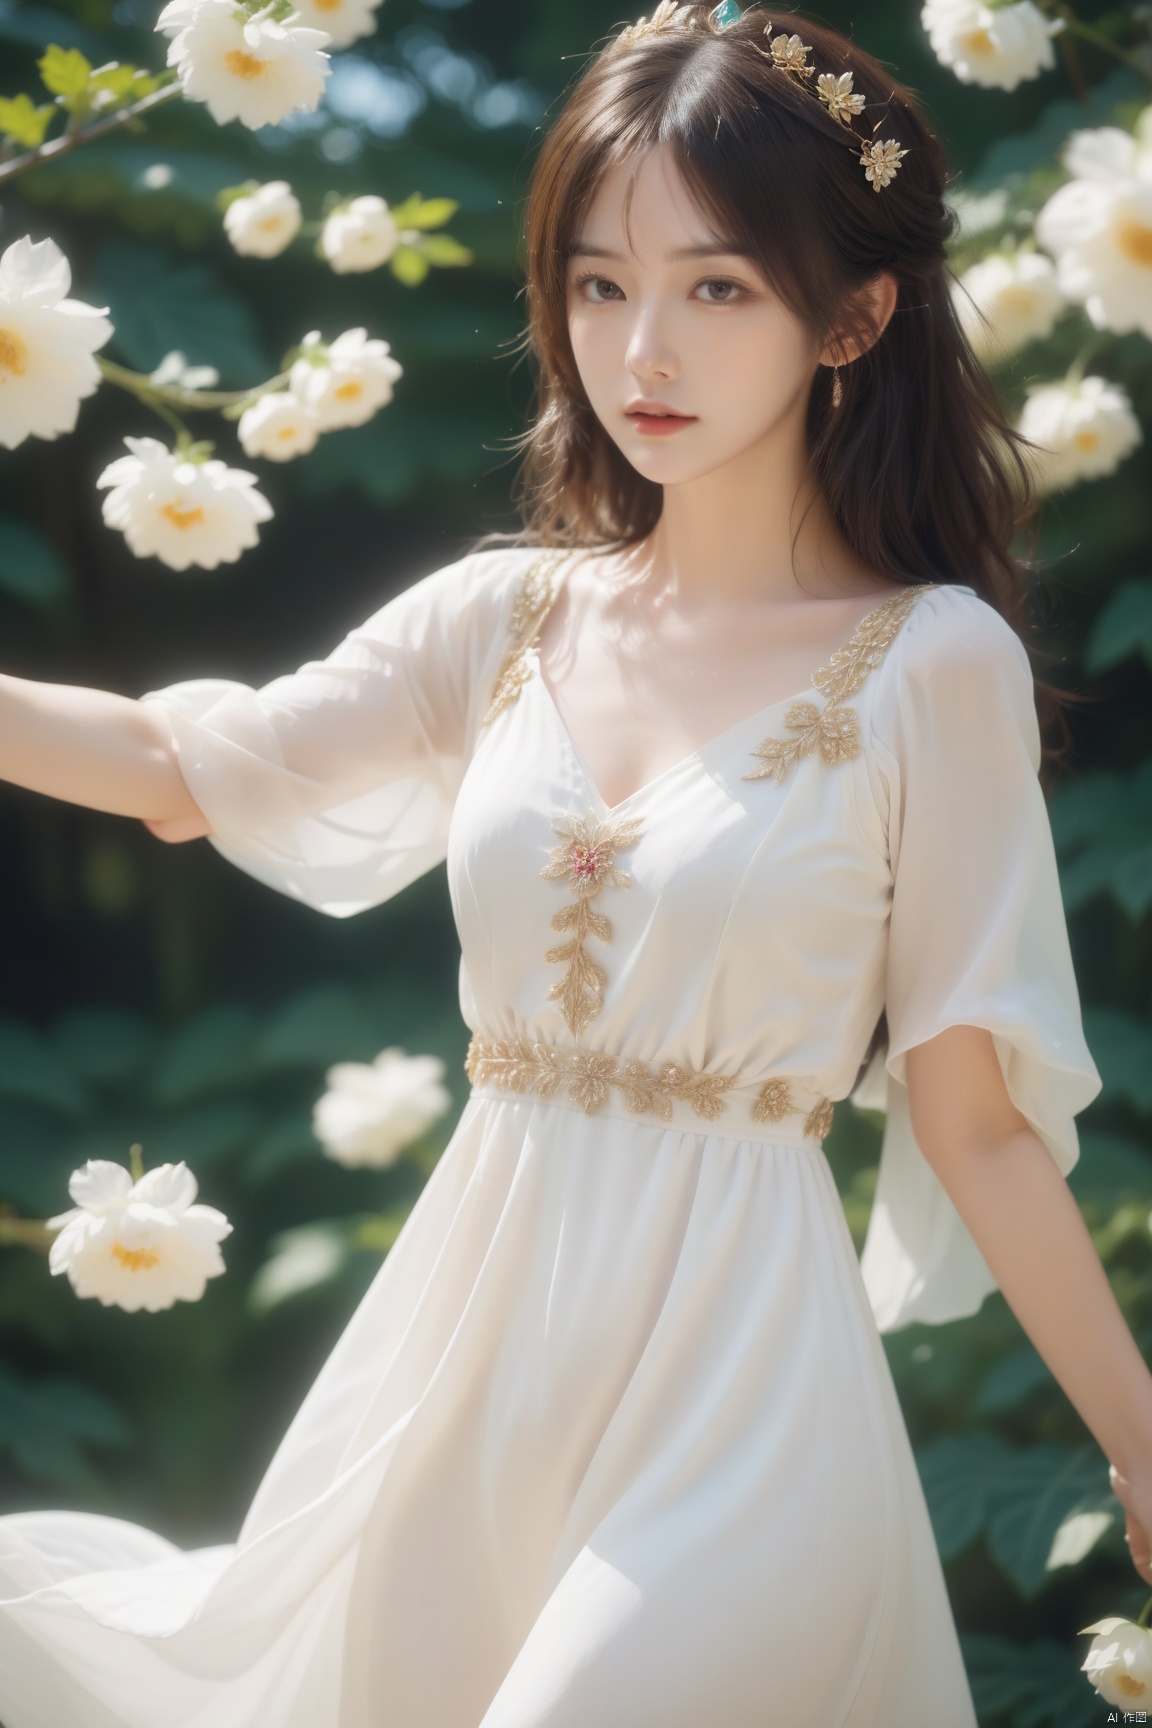  1girl,solo,stunningly beautiful,white dress,detached sleeves,jewelry,flower,floating hair,Canon RF 85mm f/1.2L 85mm,action shot,Super Telephoto Lens, 1 girl